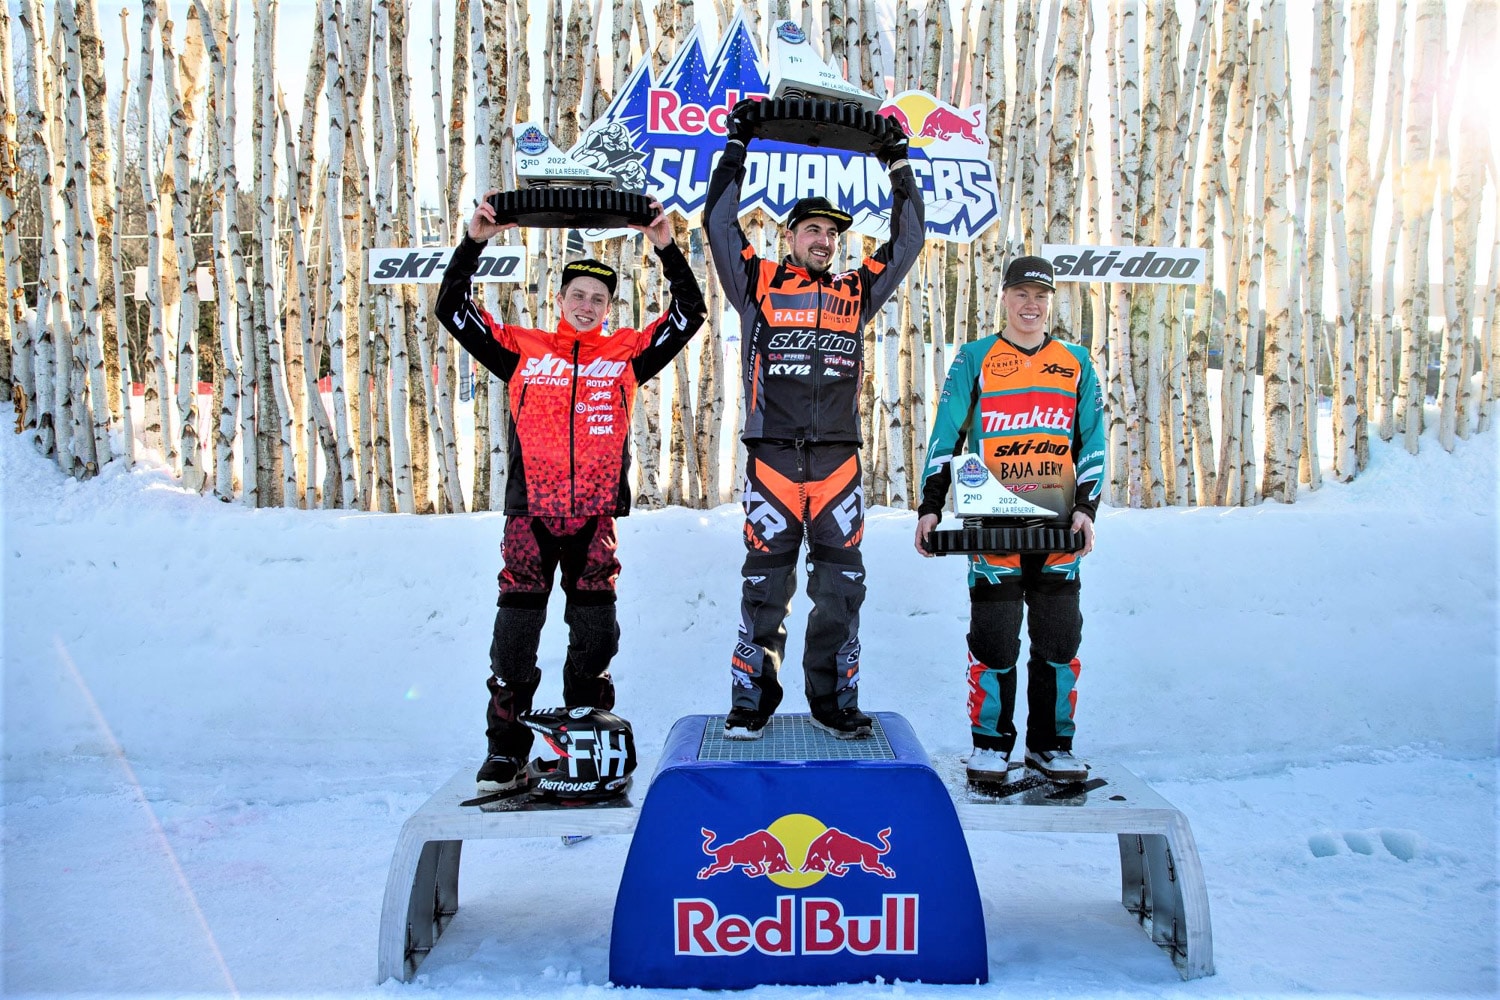 2022 Red Bull Sledhammers Results